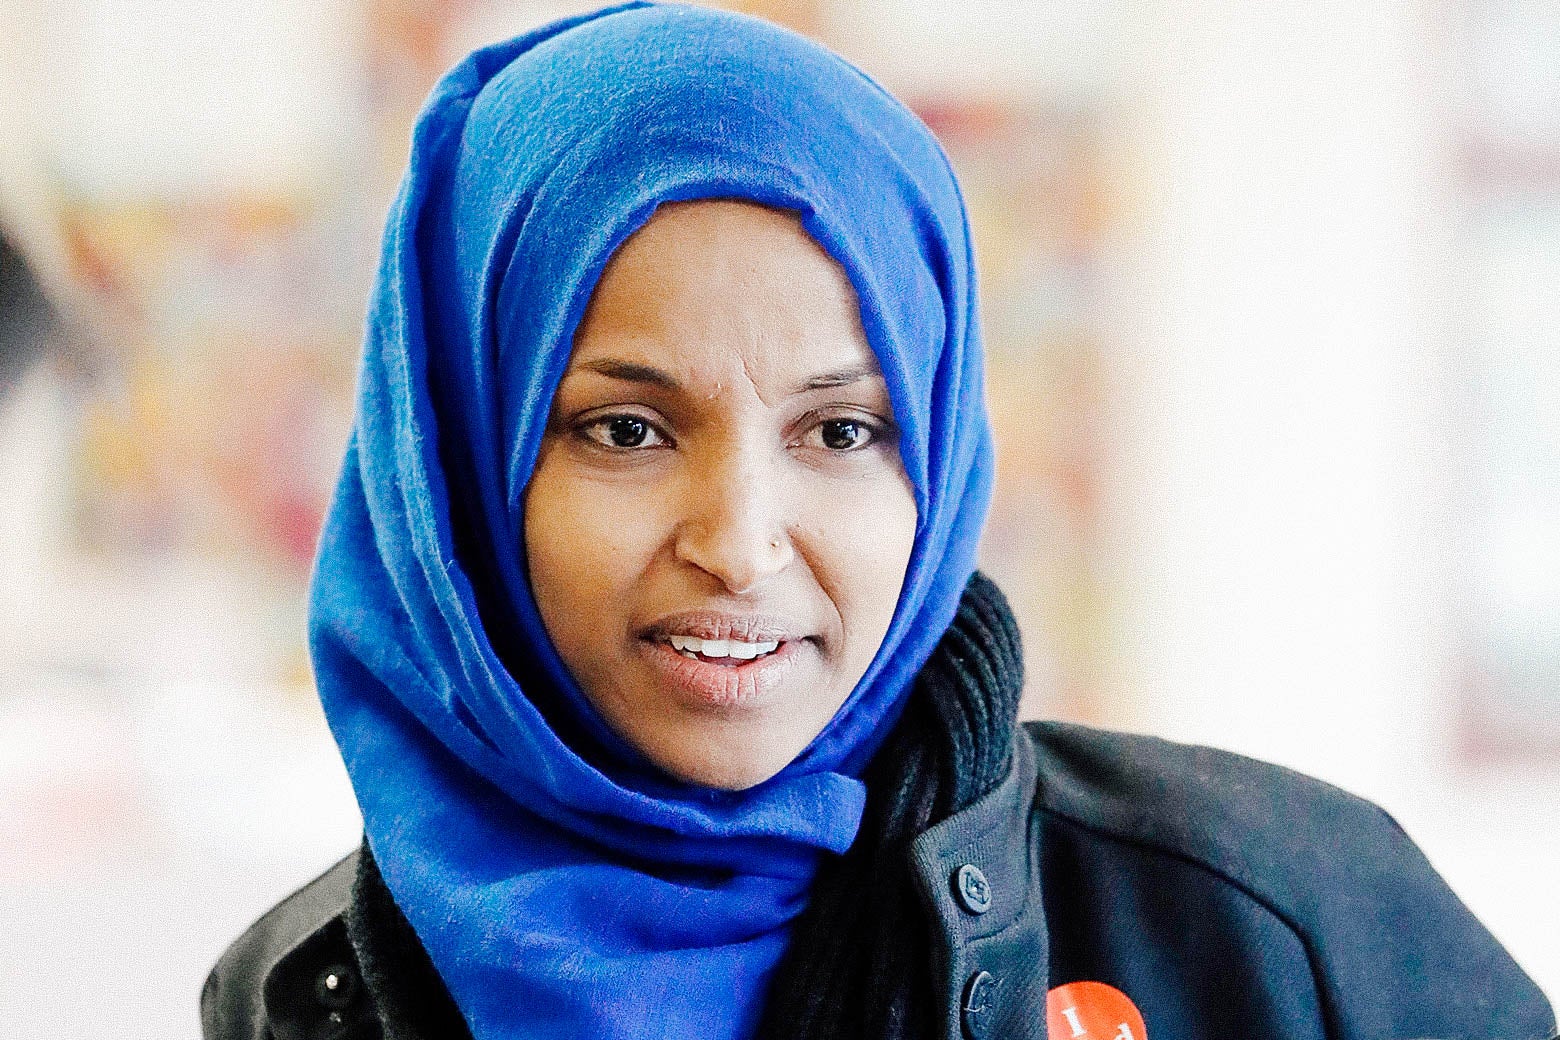 Ilhan Omar affixes a political button to her coat on Election Day in Minnesota.